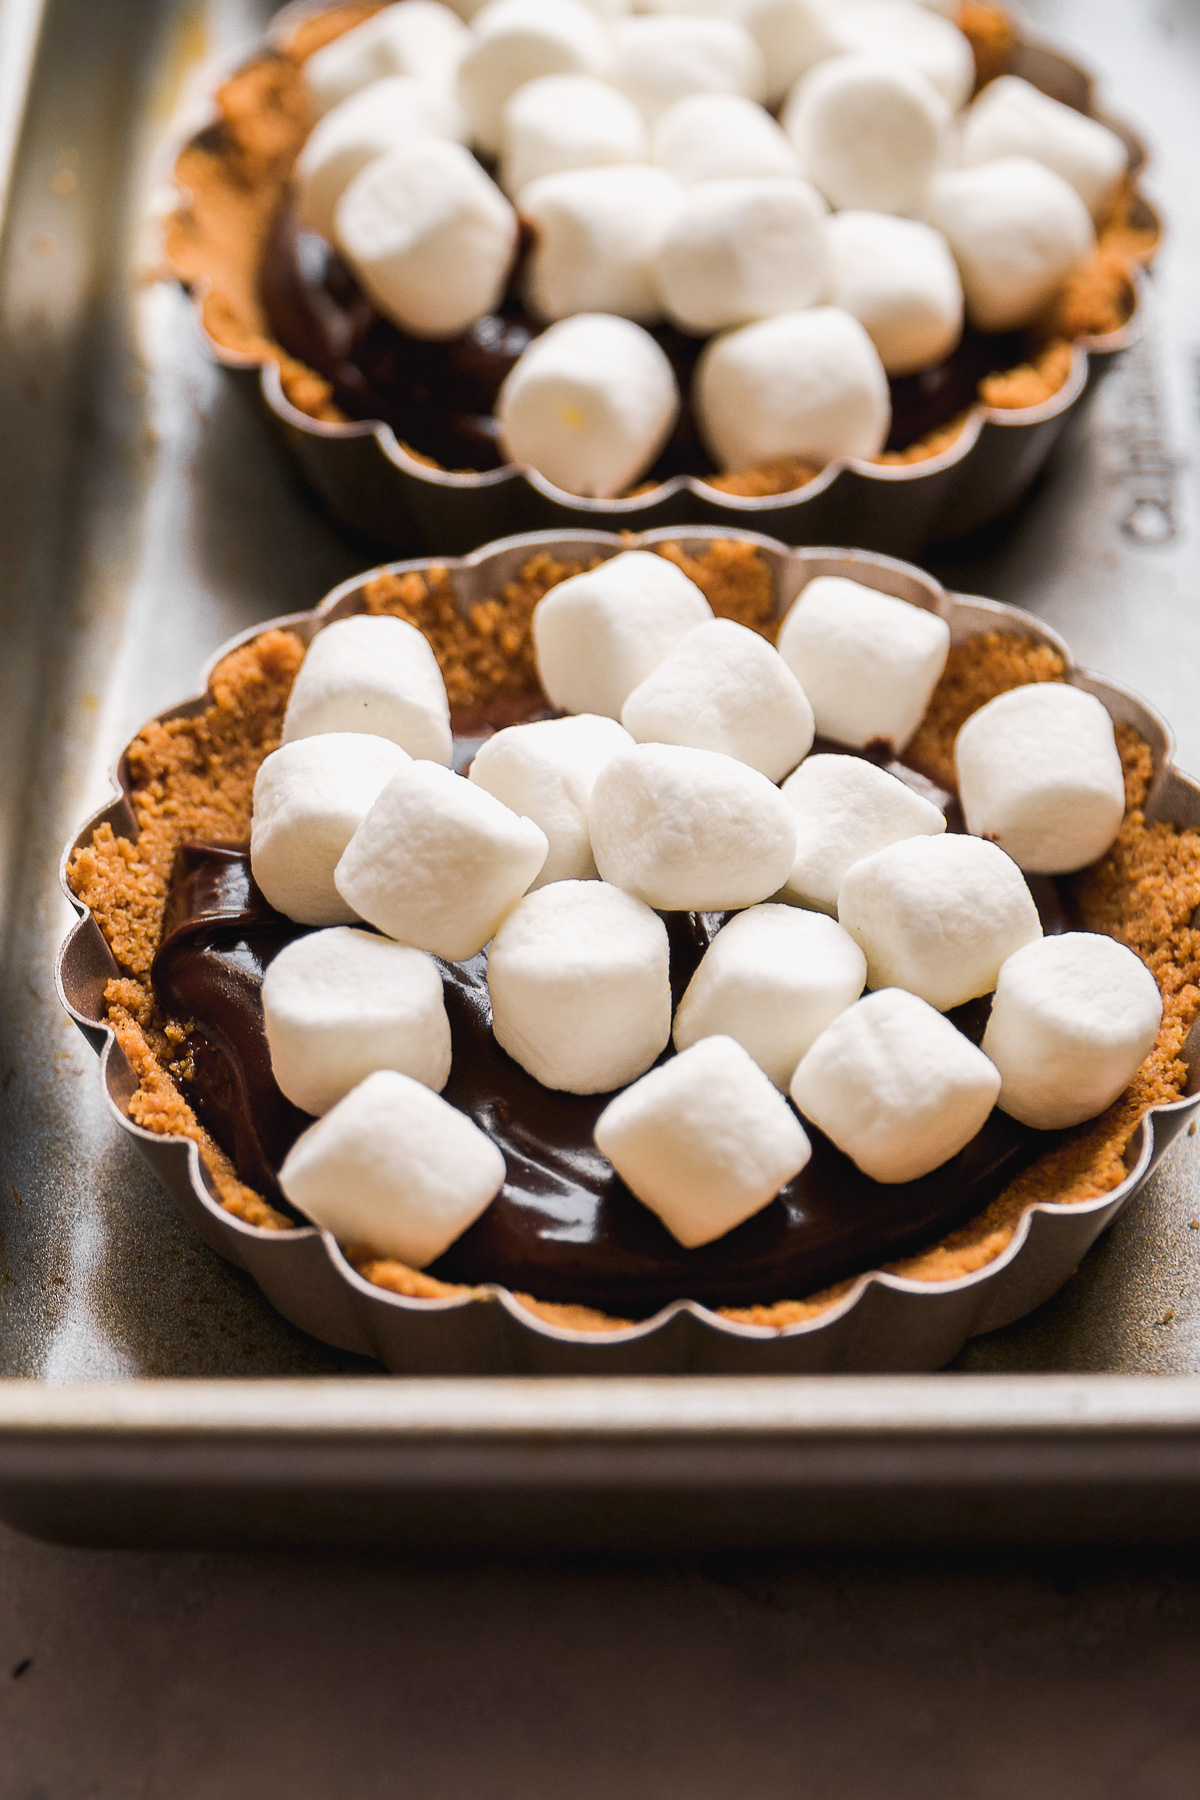 Mini s'mores pies about to be baked in the oven.